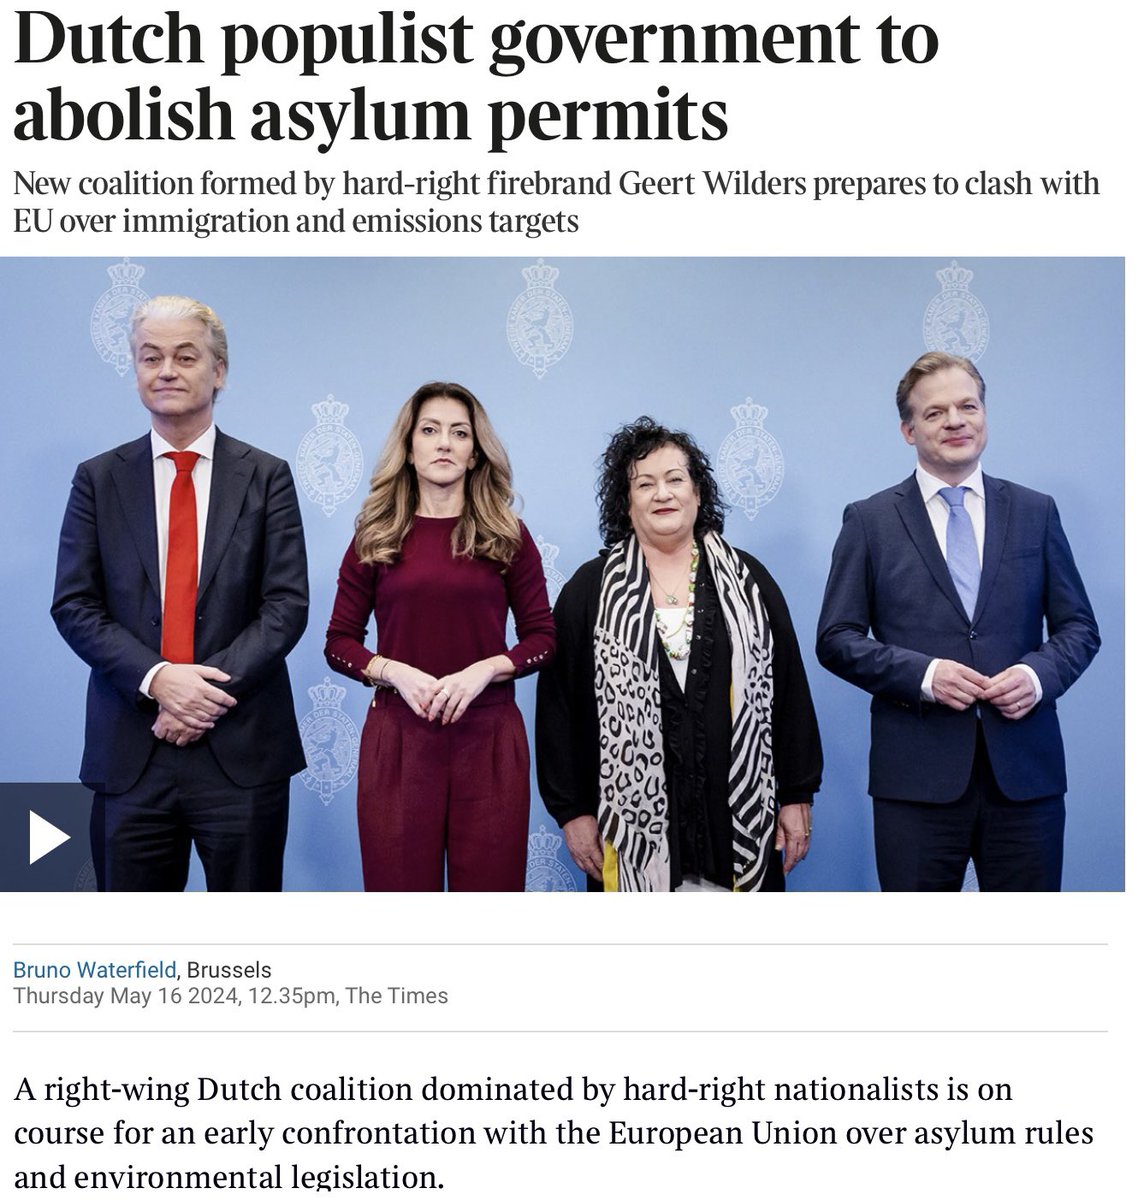 This is good news. The Dutch will actually get the policies they voted for. #Illegalimmigrants #Illegals #Deport